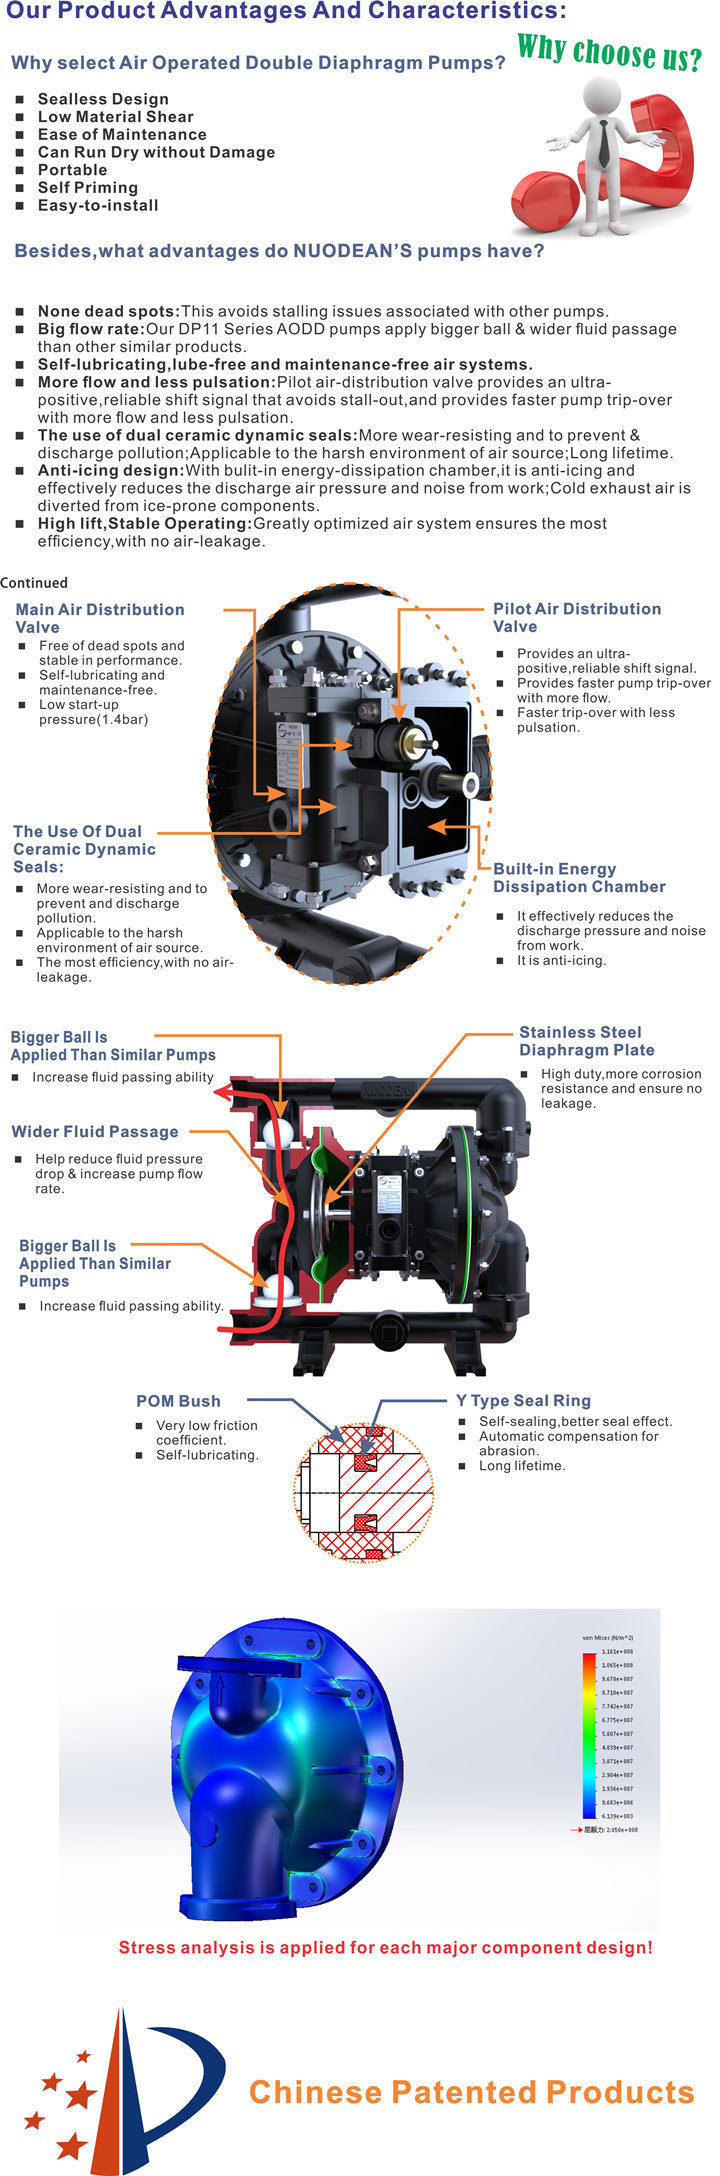 Large Flow Air Operated (Powered) Double Diaphragm Pump